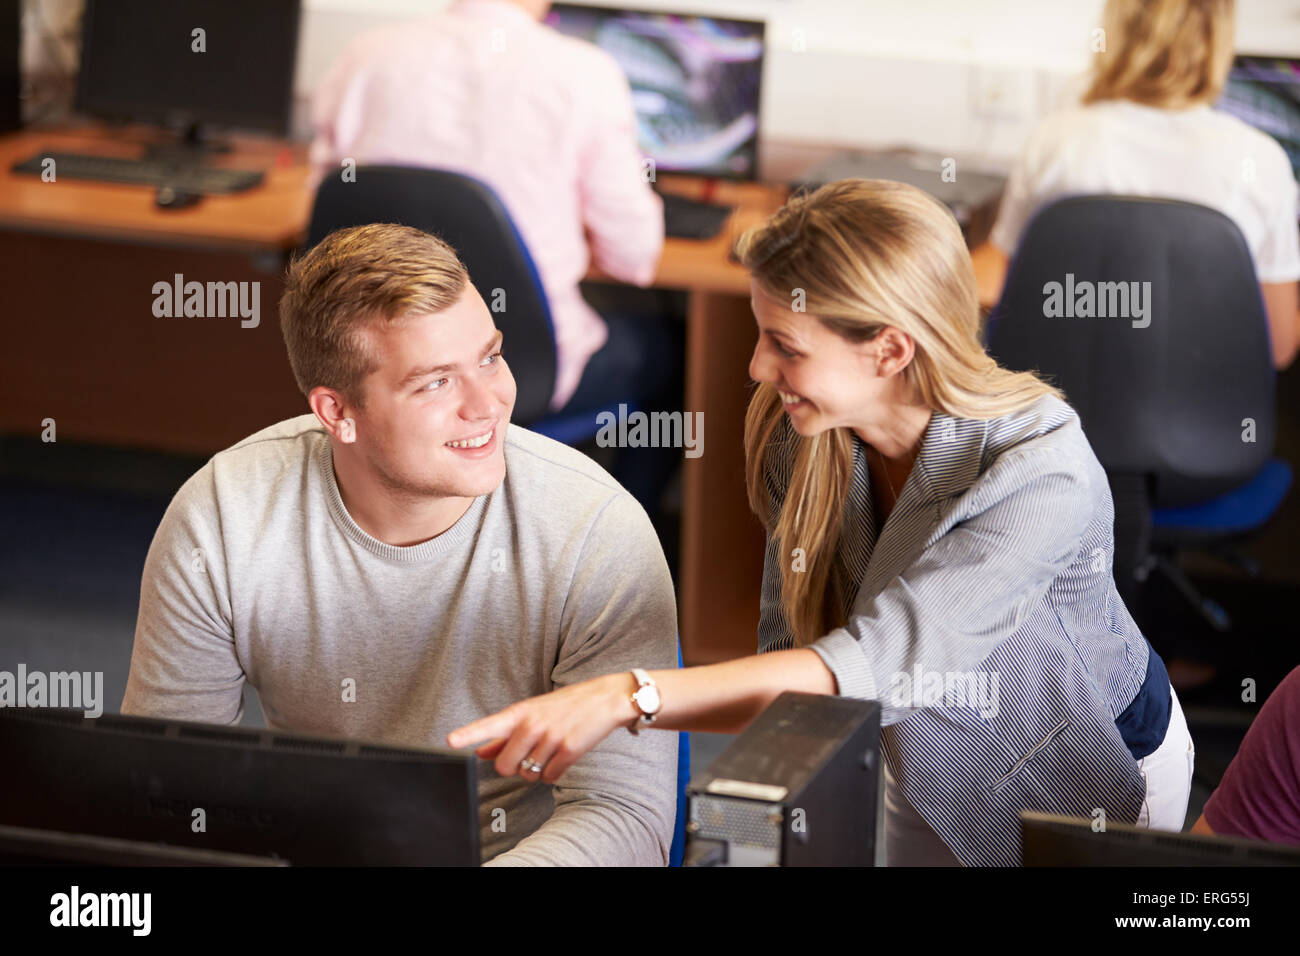 College Students At Computers In Technology Class Stock Photo